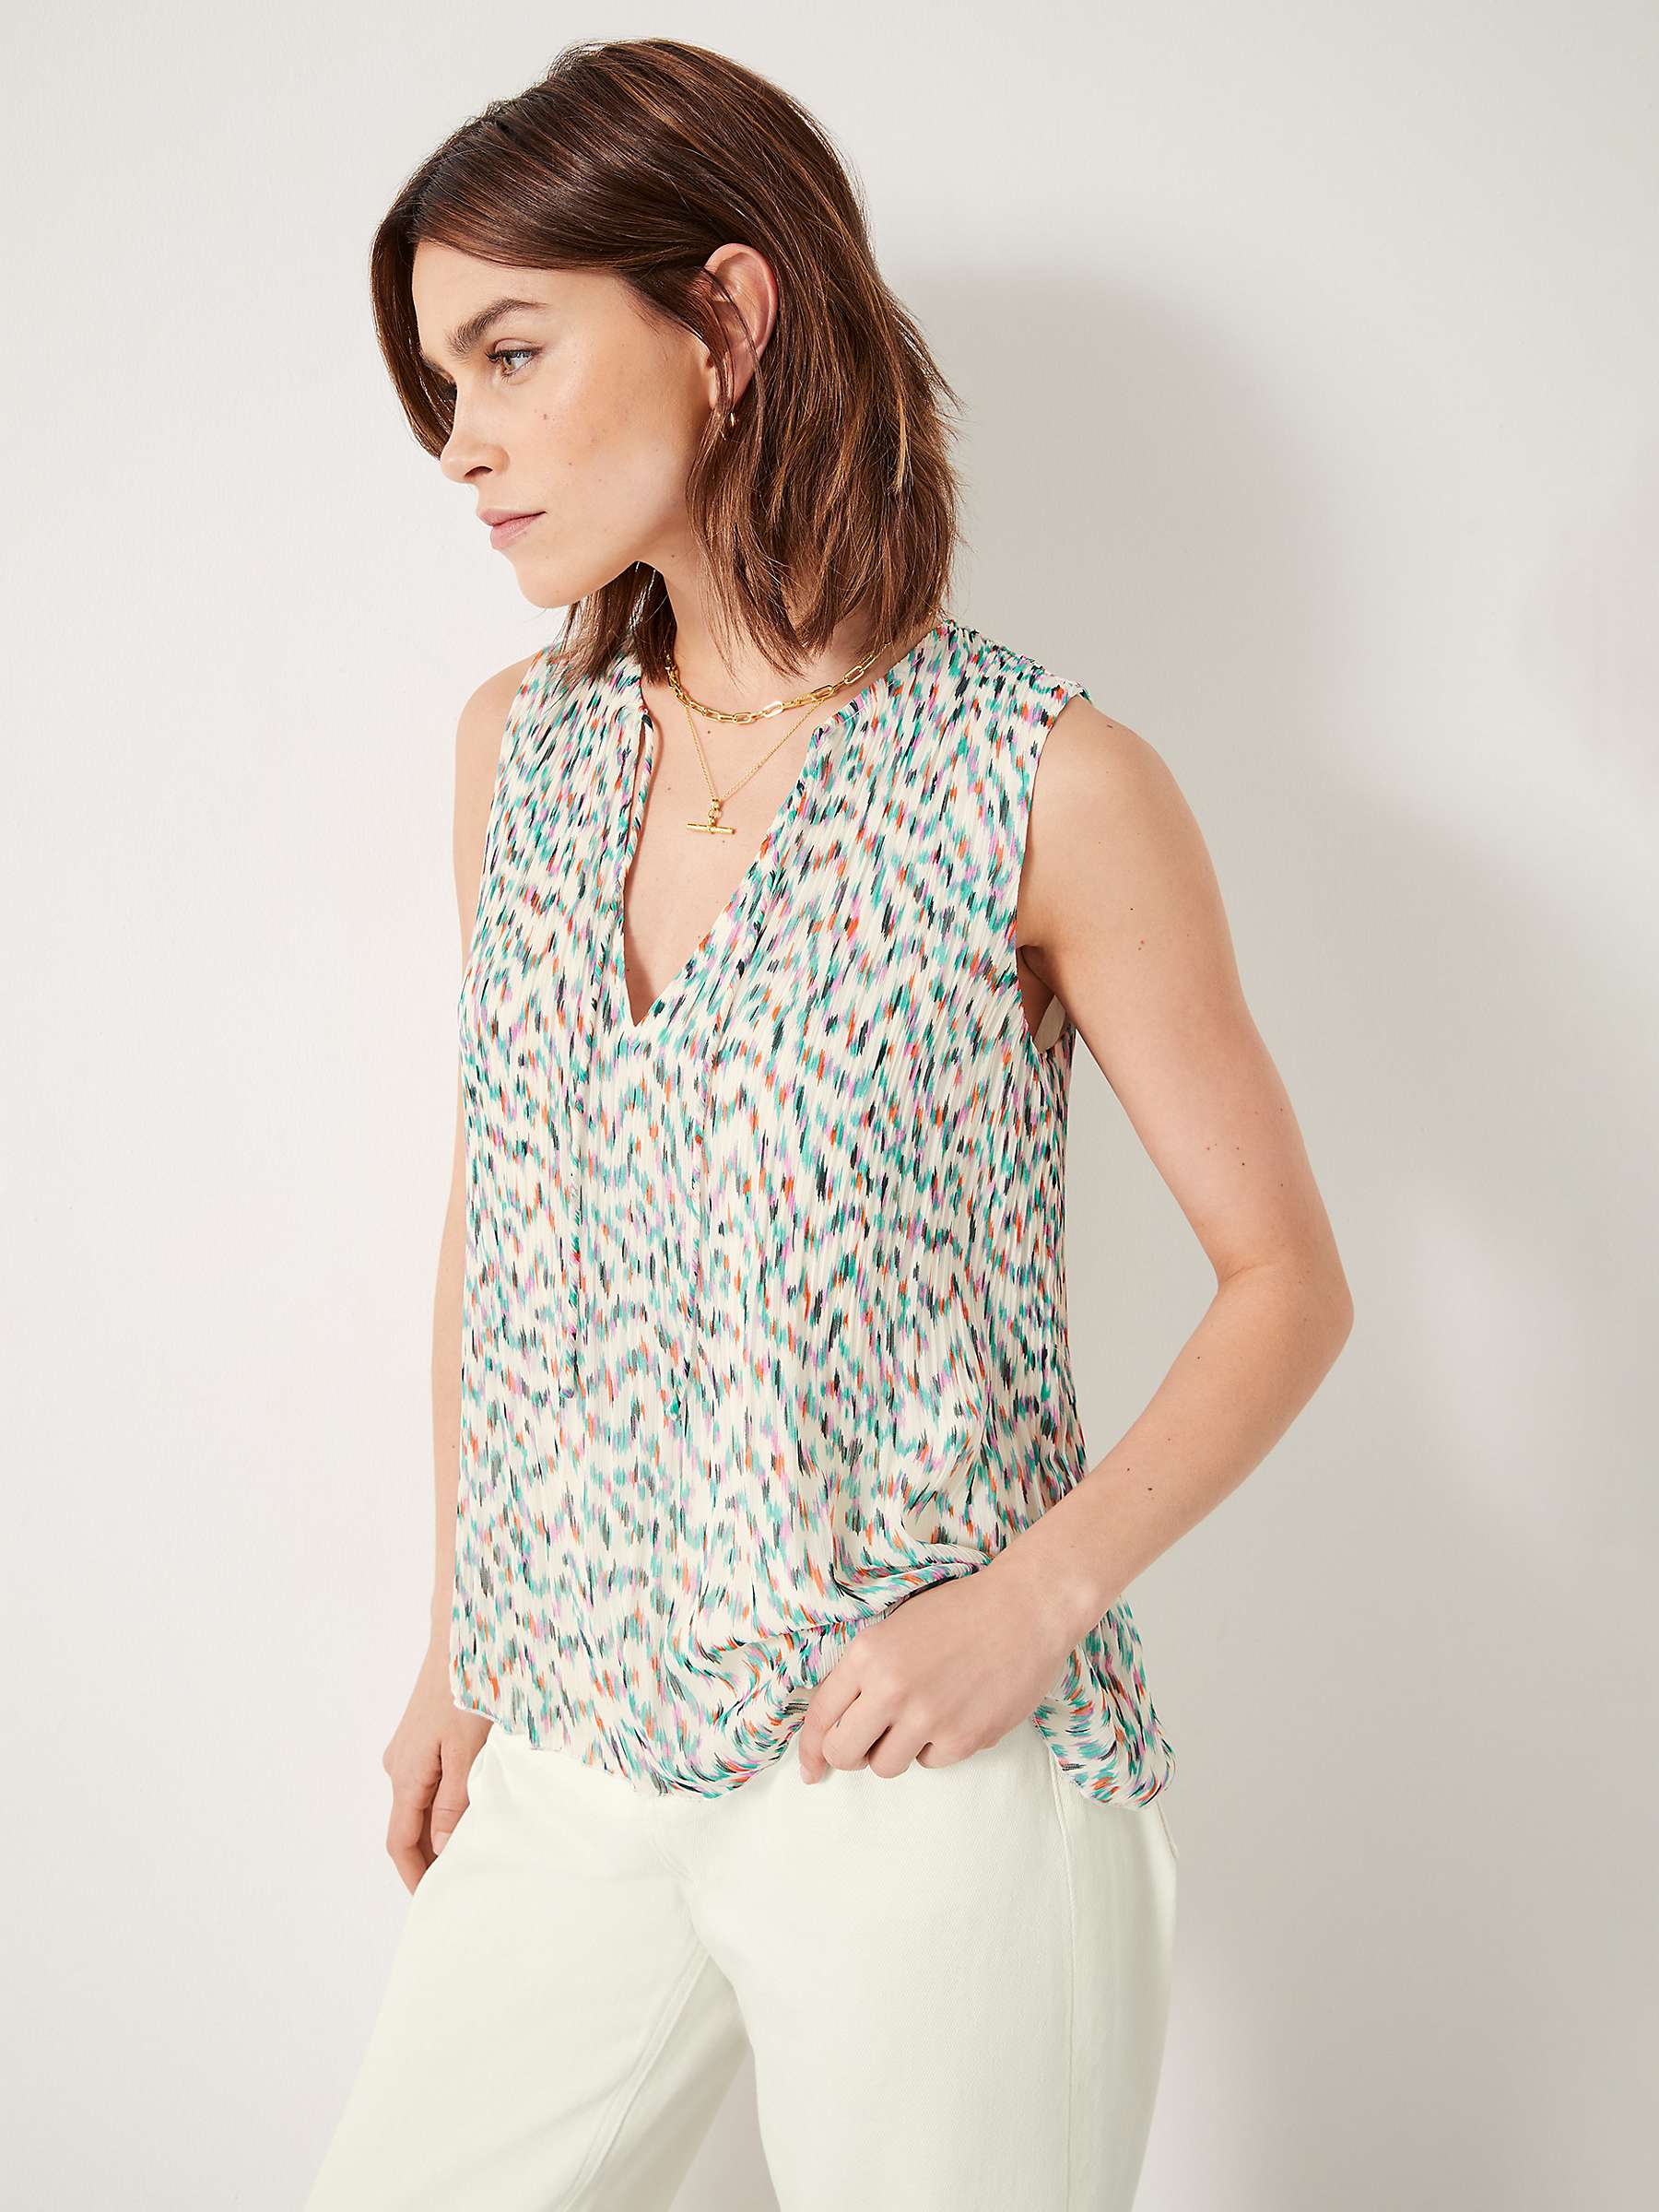 Buy HUSH Isabel Pleated Top, Multi Online at johnlewis.com